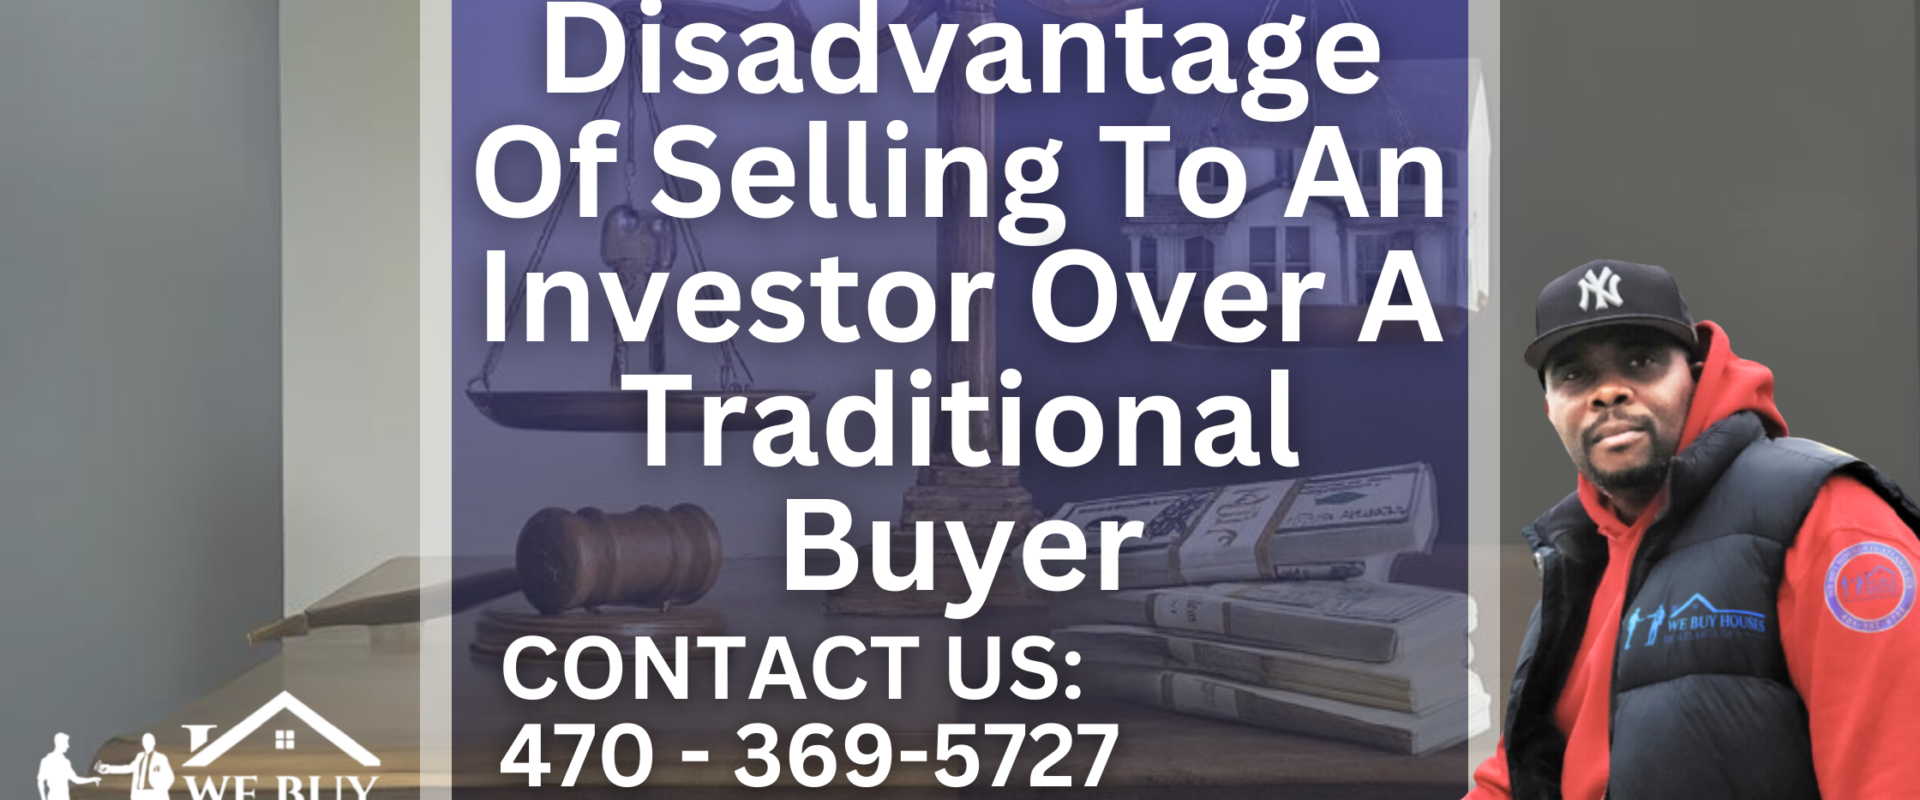 Disadvantage Of Selling To An Investor Over A Traditional Buyer